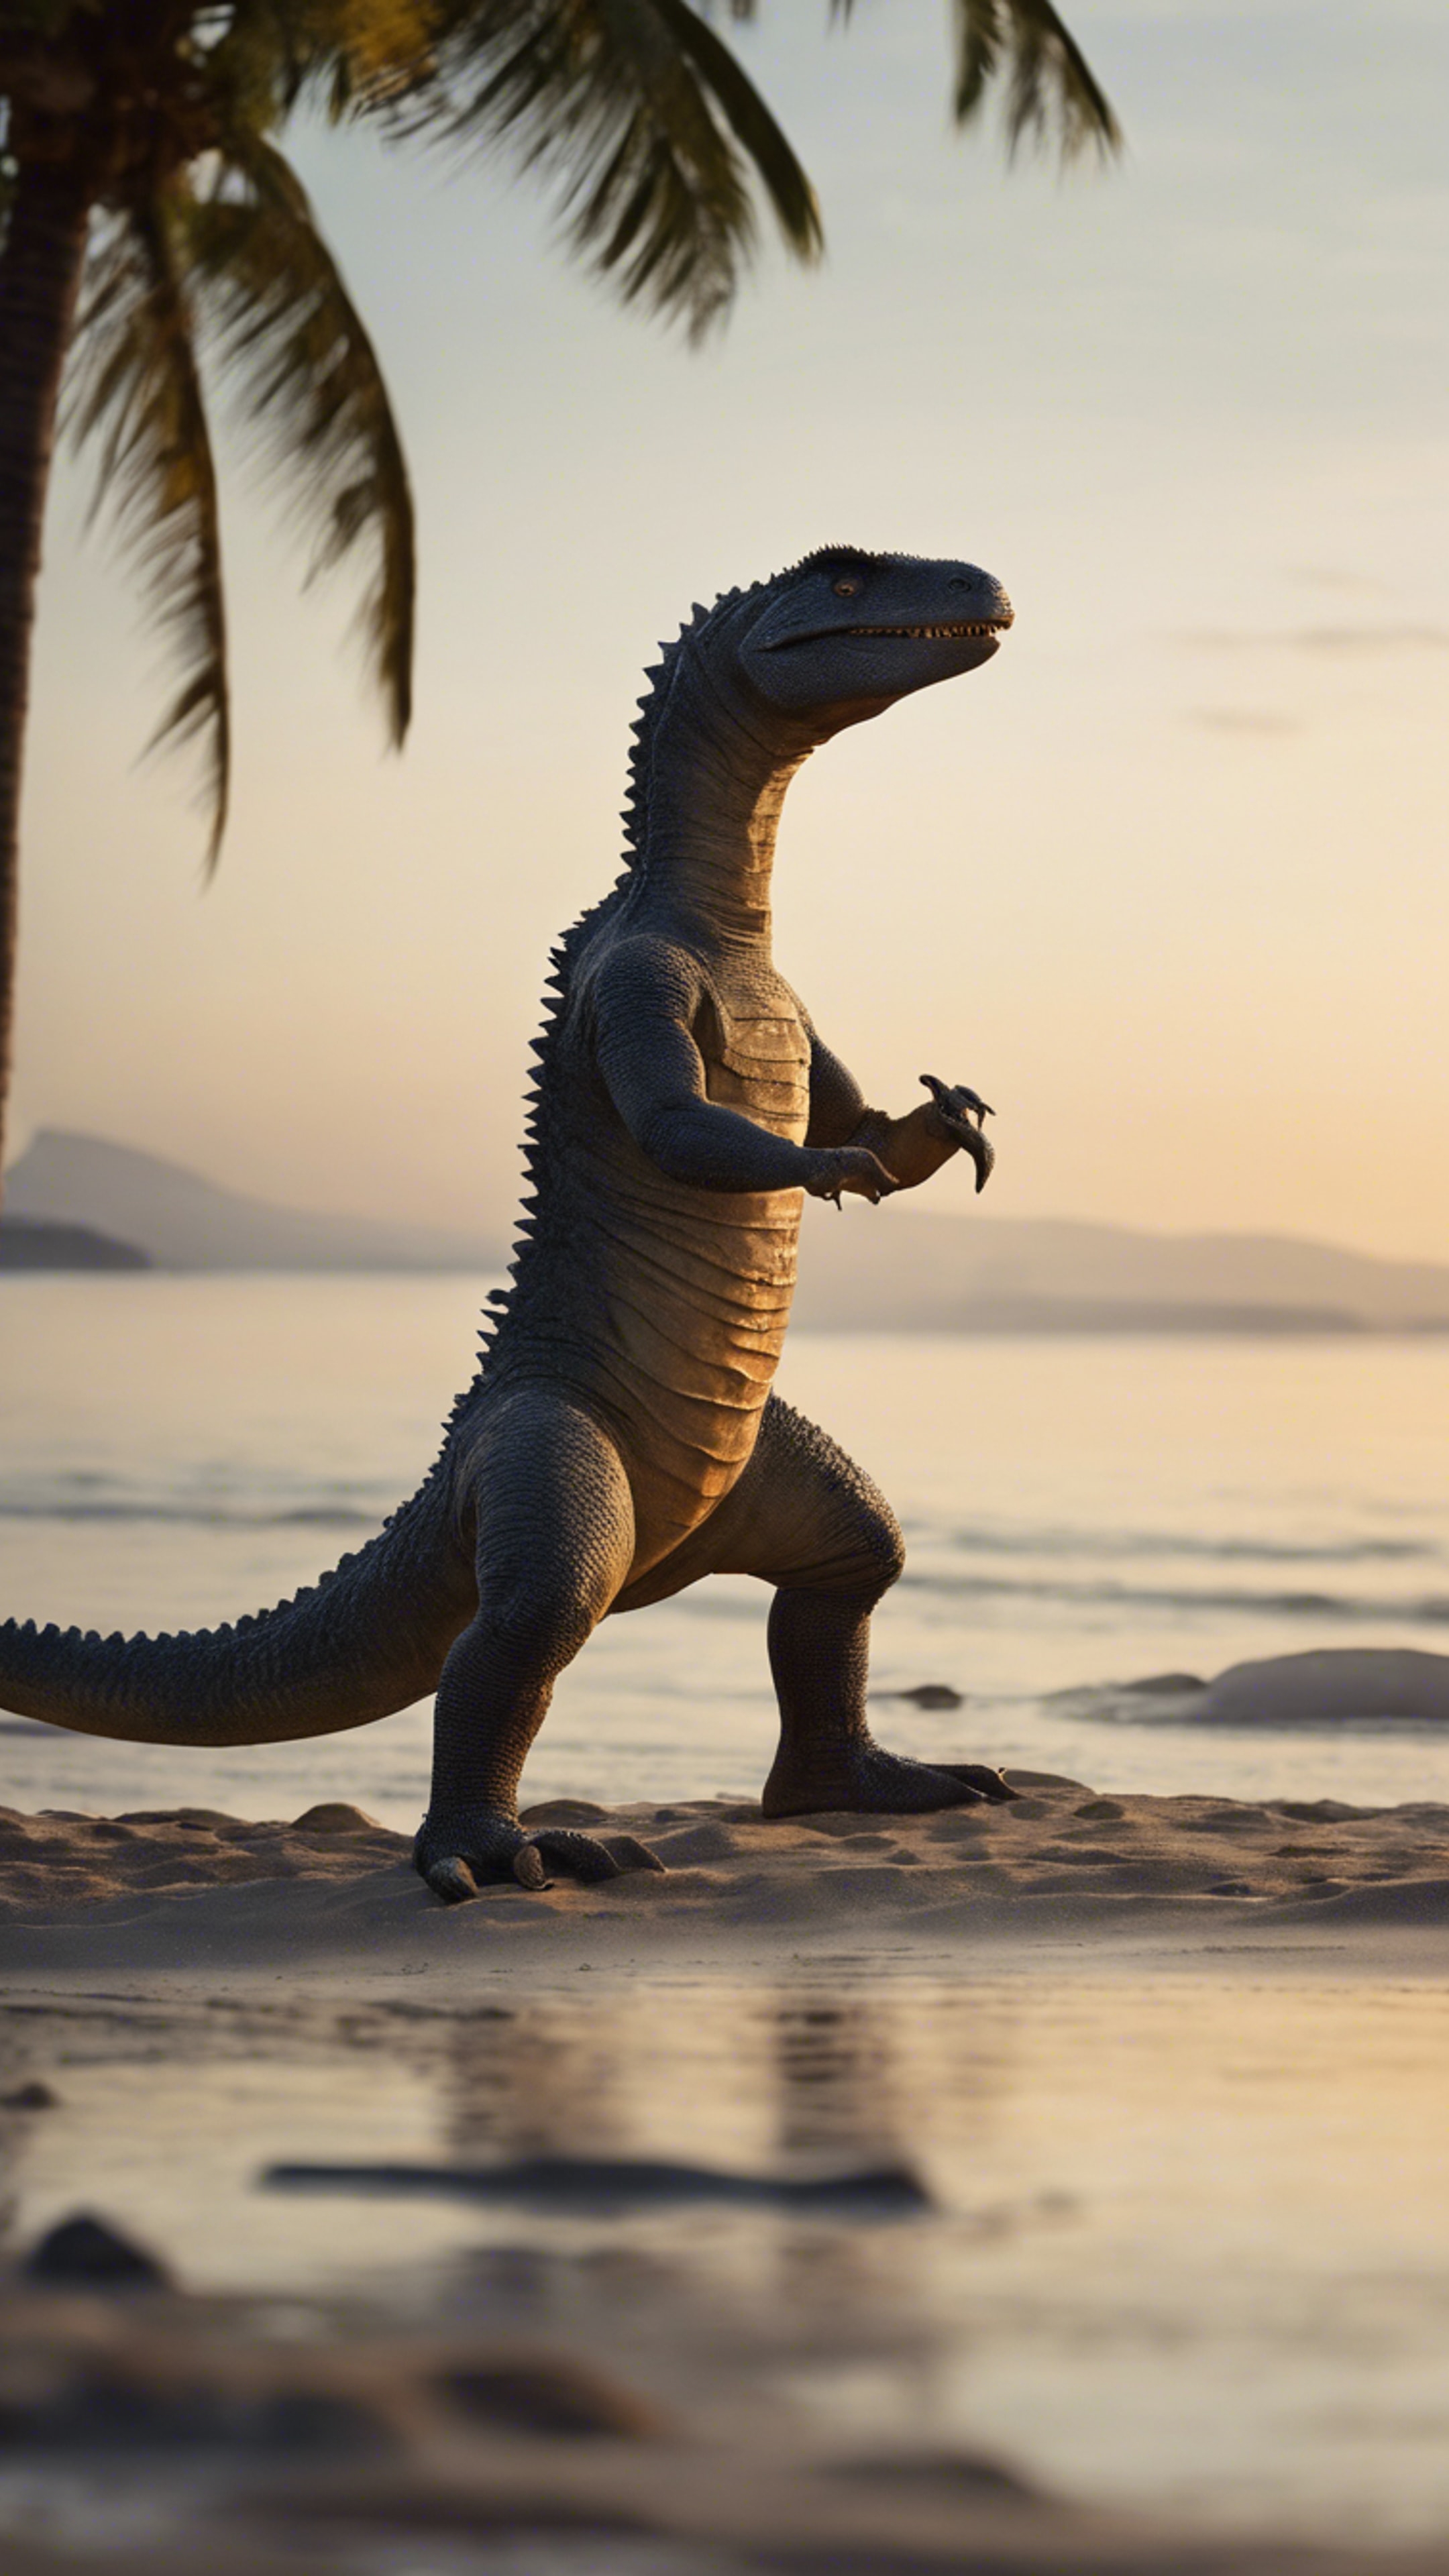 A tranquil scene of Thescelosaurus practicing Tai-Chi during the early dawn on a peaceful beach. Валлпапер[4138bc2c7b604ba6814f]